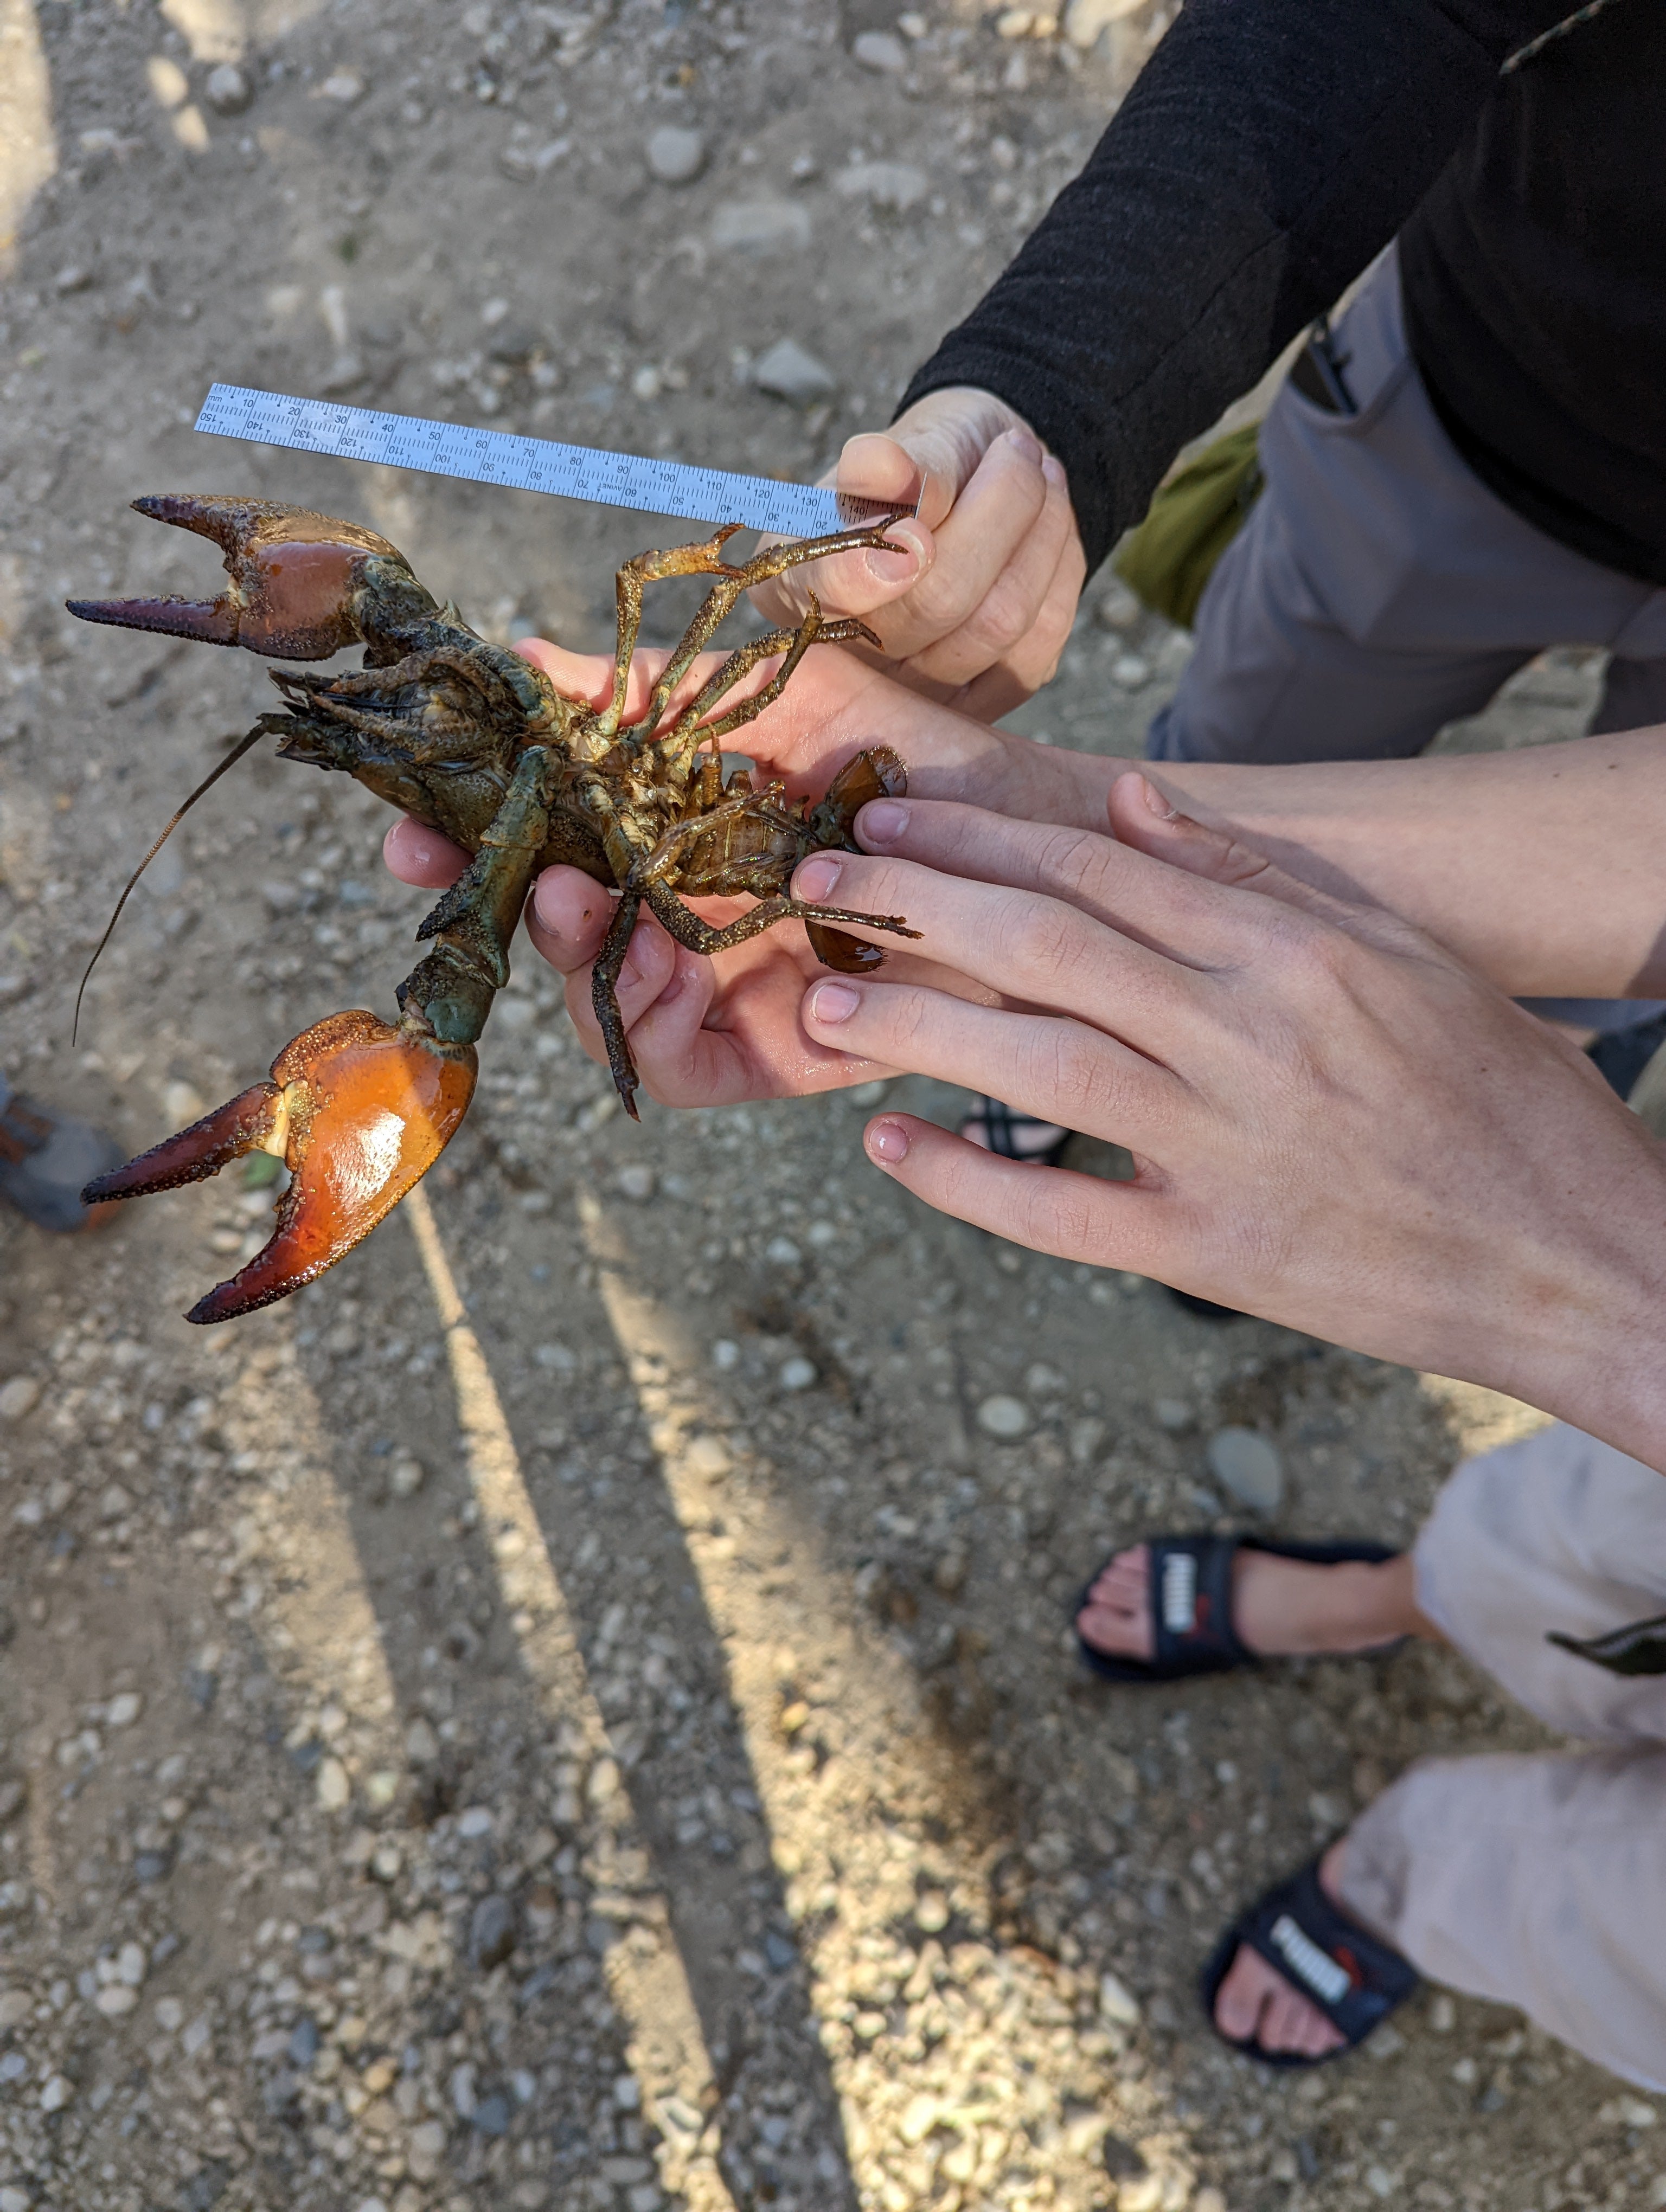 a pair of hands hold a huge crayfish, whose claws are as large as the person's thumb! a ruler held next to the crayfish shows it's more than 12cm long